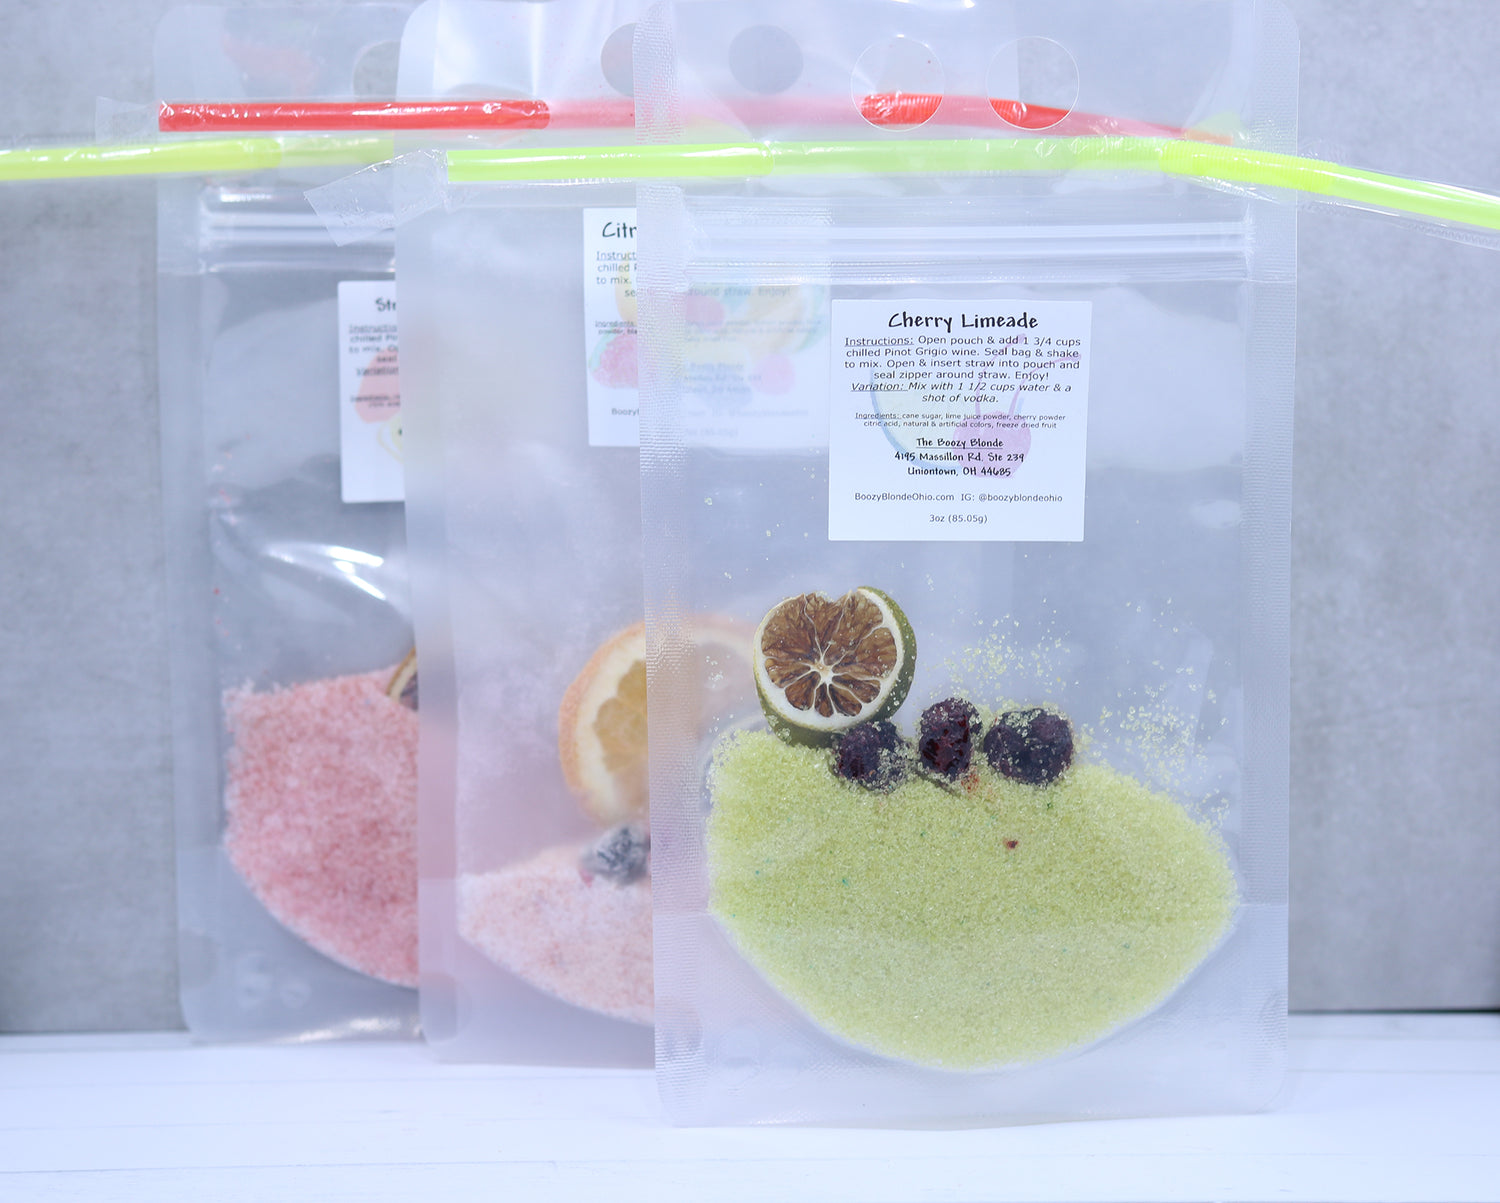 Drink Mixes & Toppers